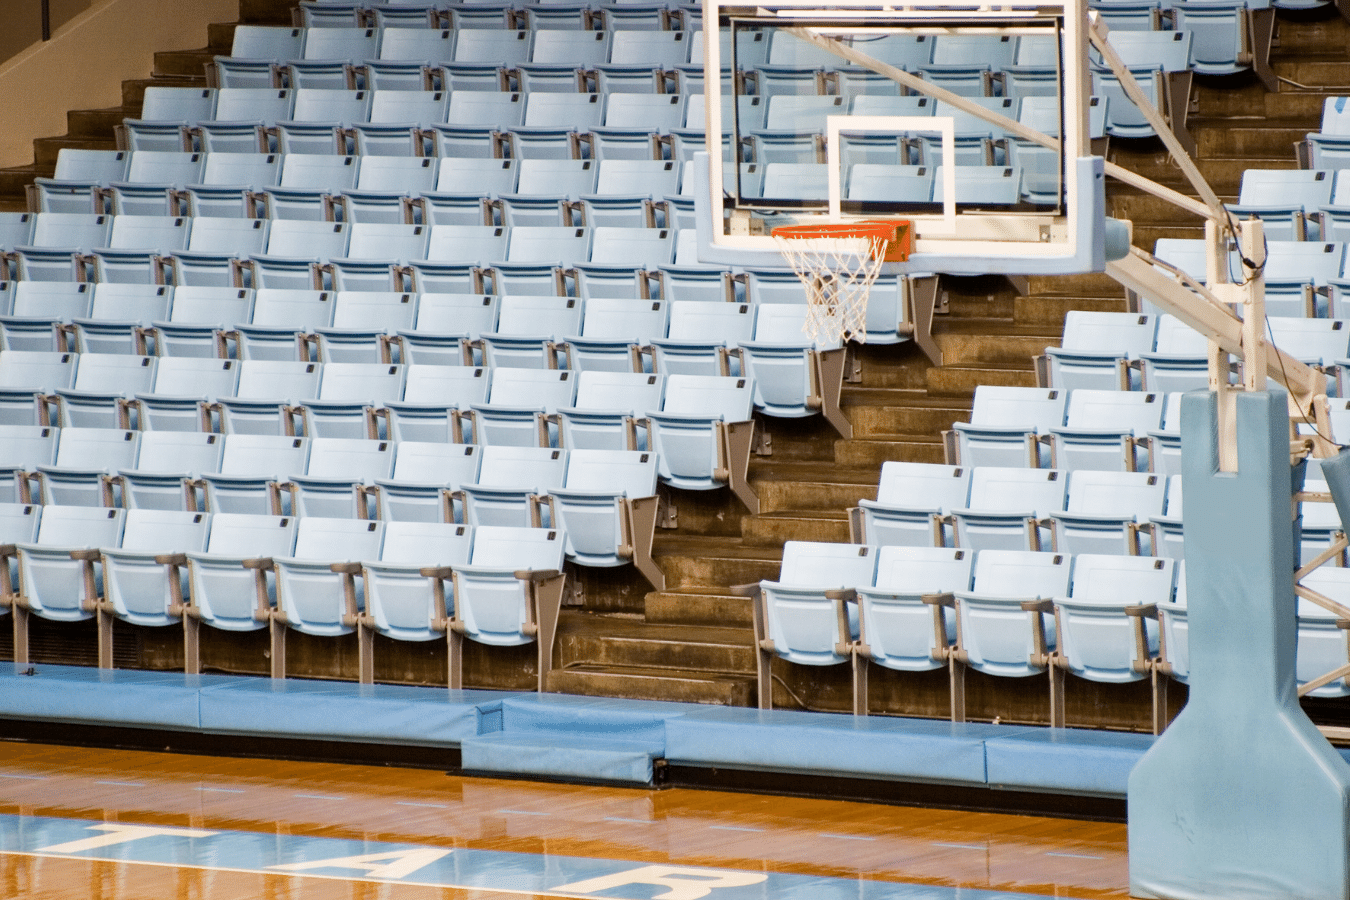 The Dean Smith Basketball Stadium at UNC at Chapel Hill